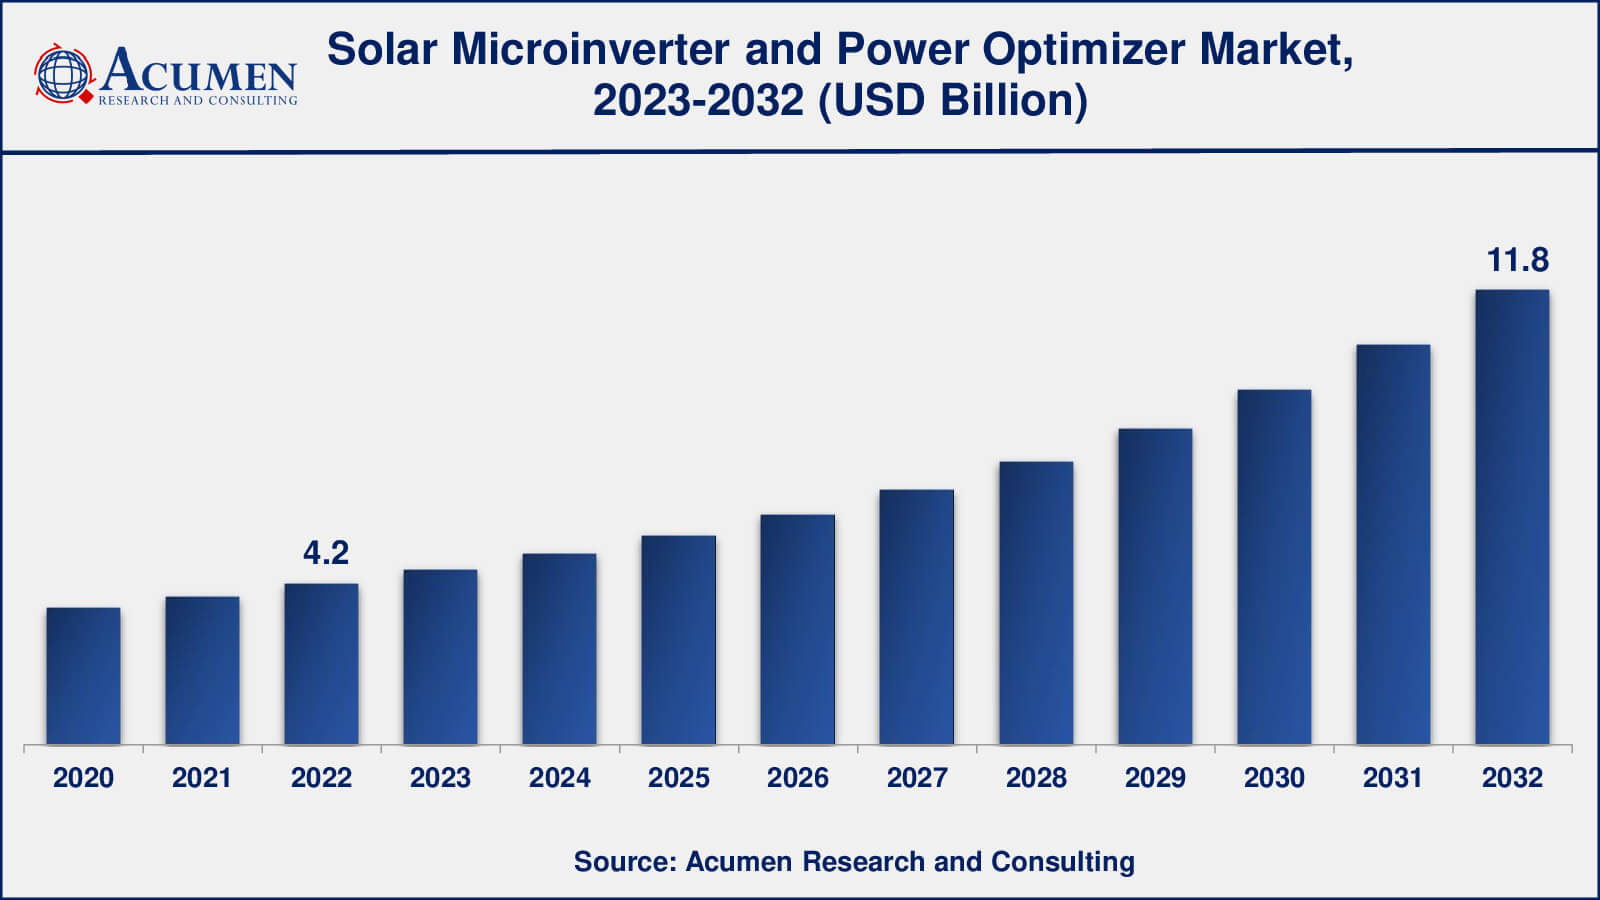 Solar Microinverter and Power Optimizer Market Drivers